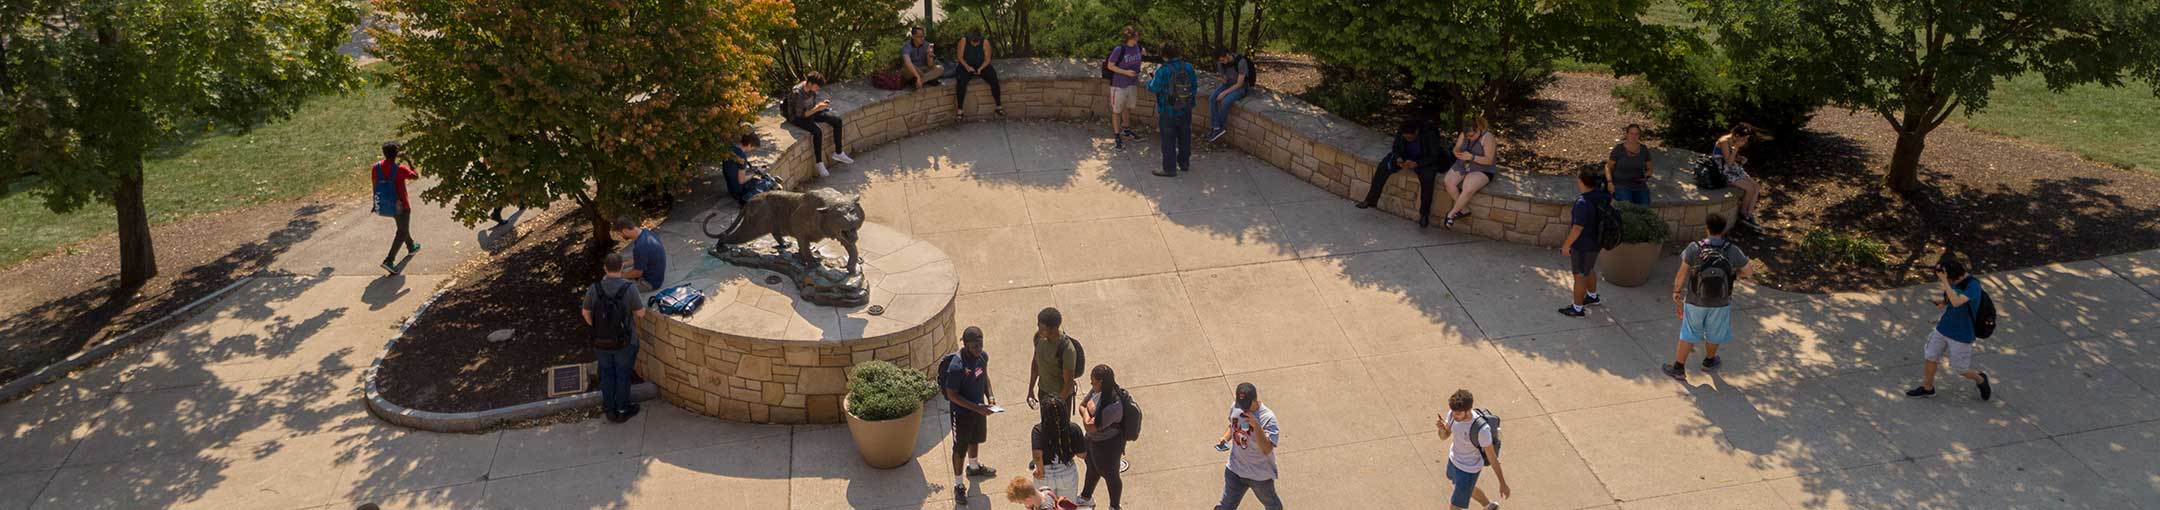 Aerial view of the Tiger Statue and students